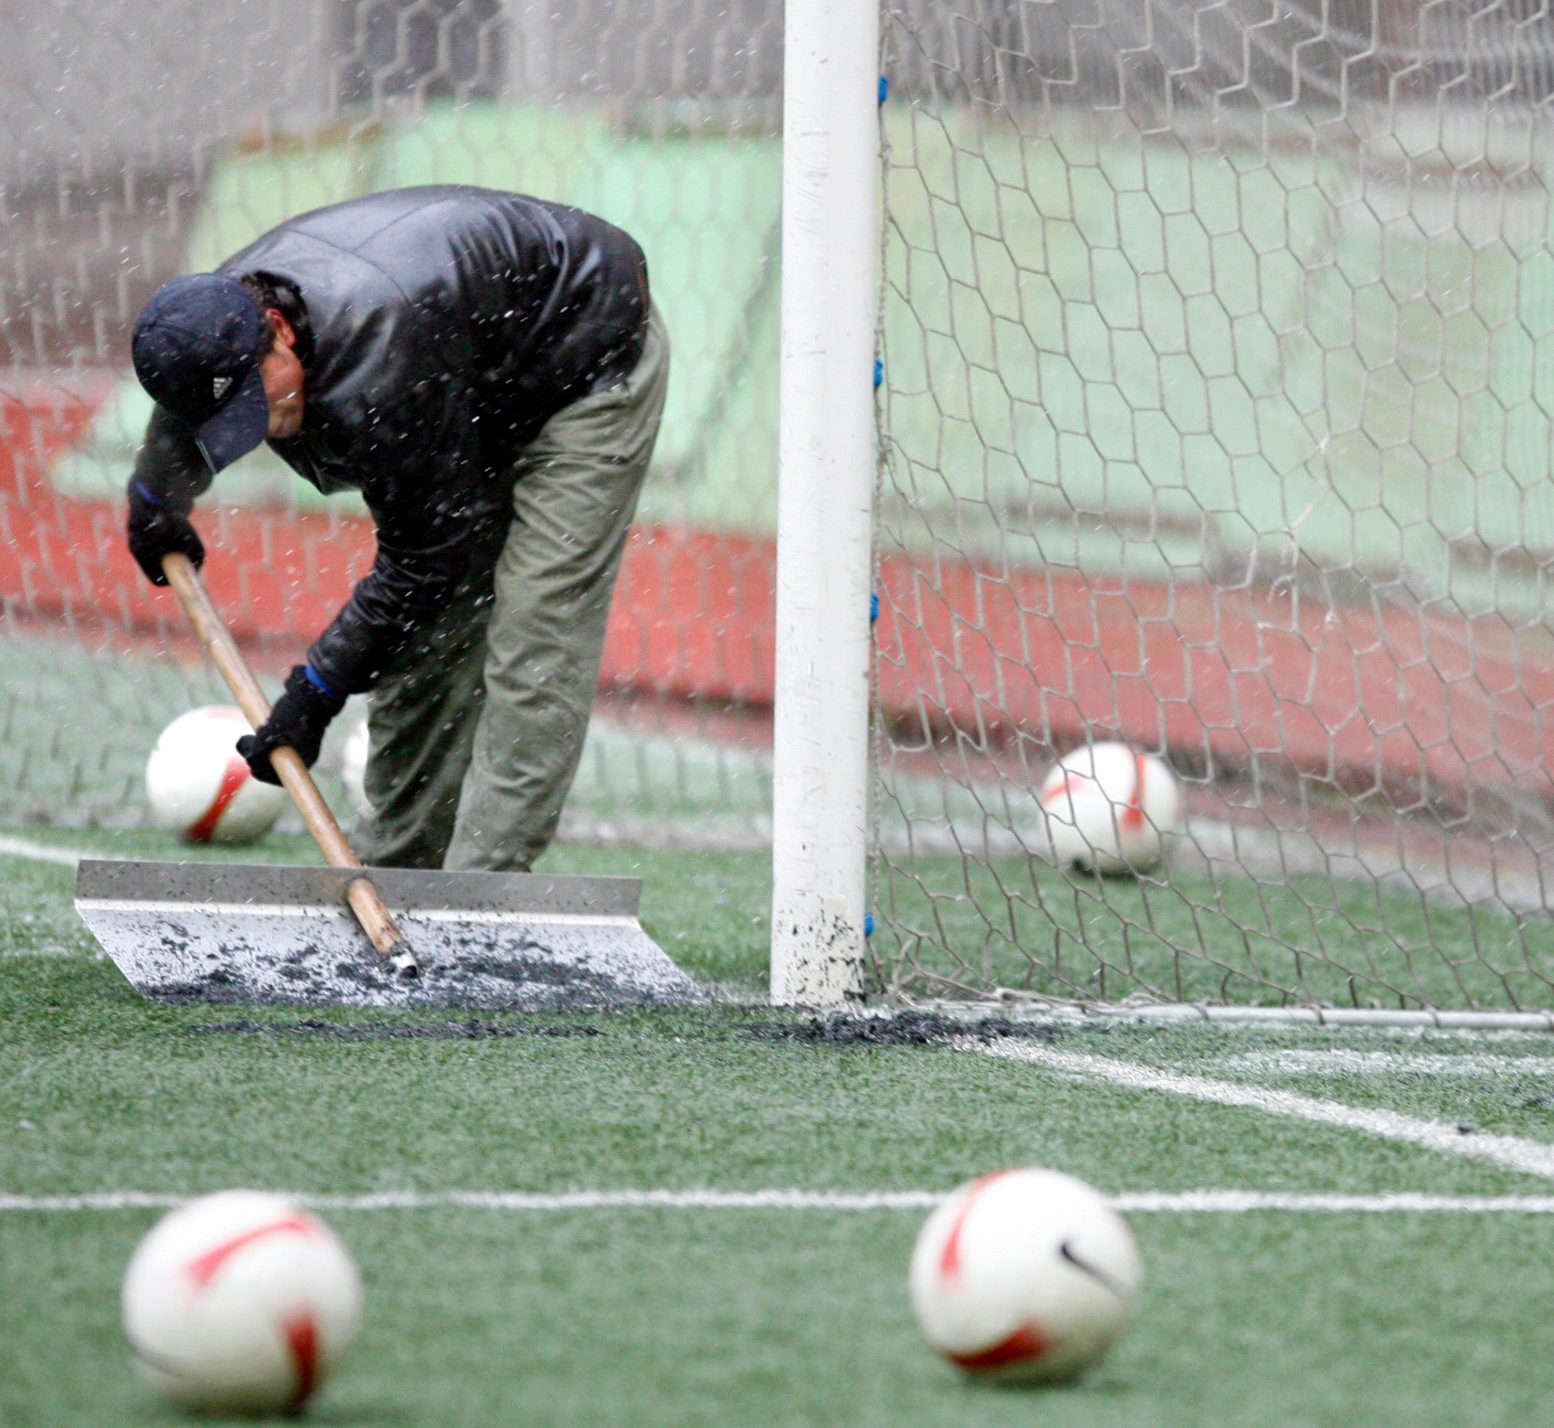 In 2007 England played a Euro 2008 qualifier against Russia at the Luzhniki Stadium in Moscow on this plastic pitch